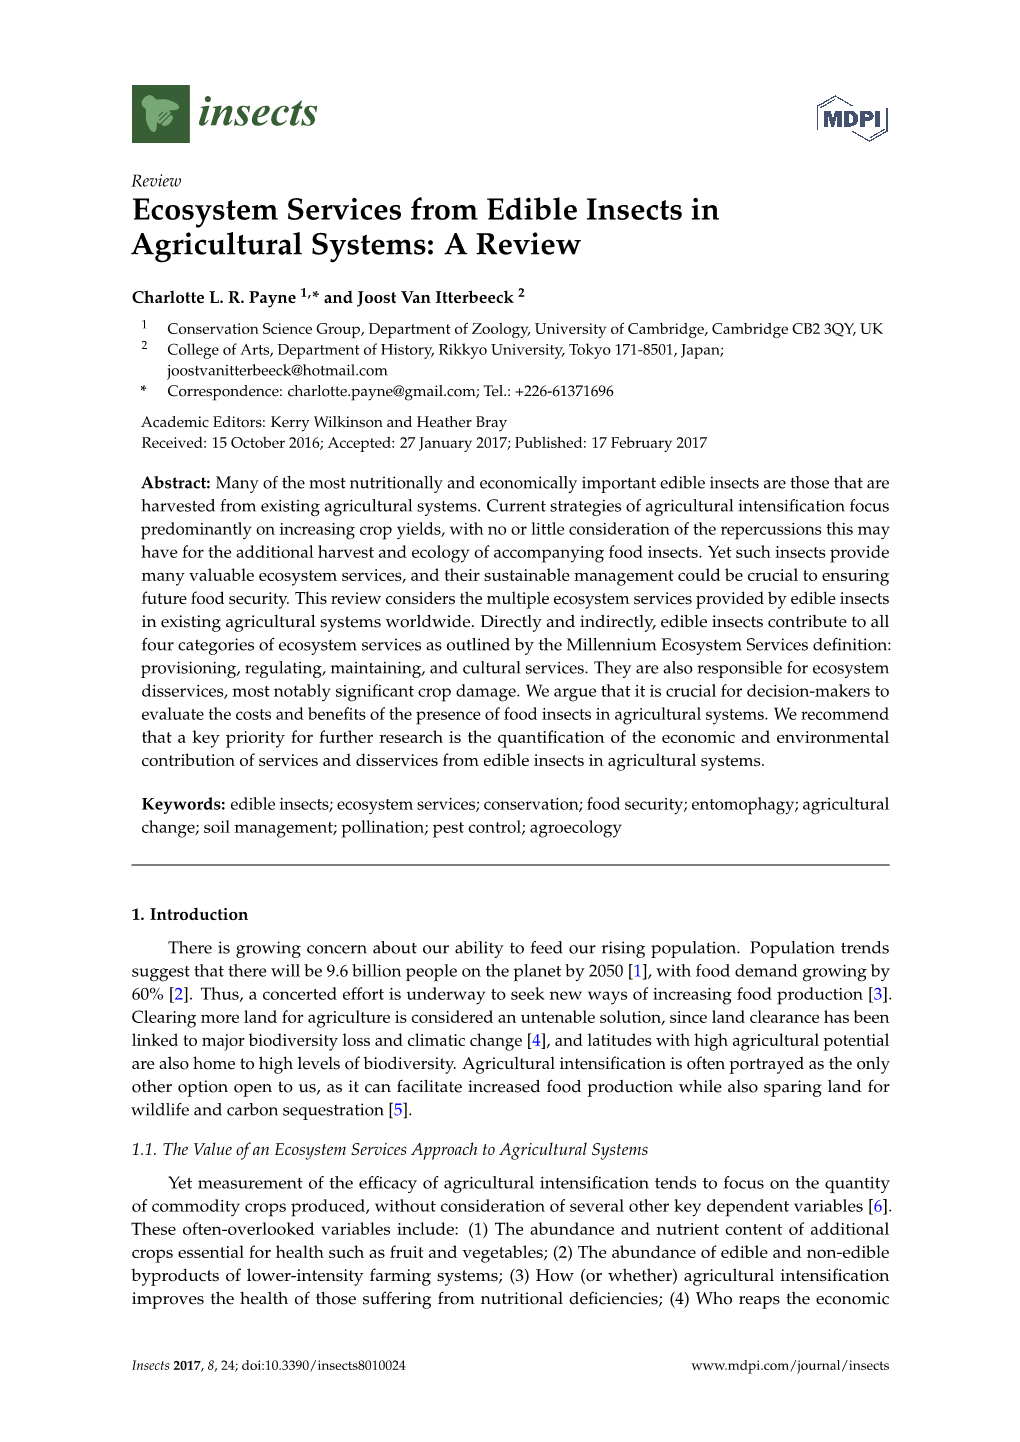 Ecosystem Services from Edible Insects in Agricultural Systems: a Review